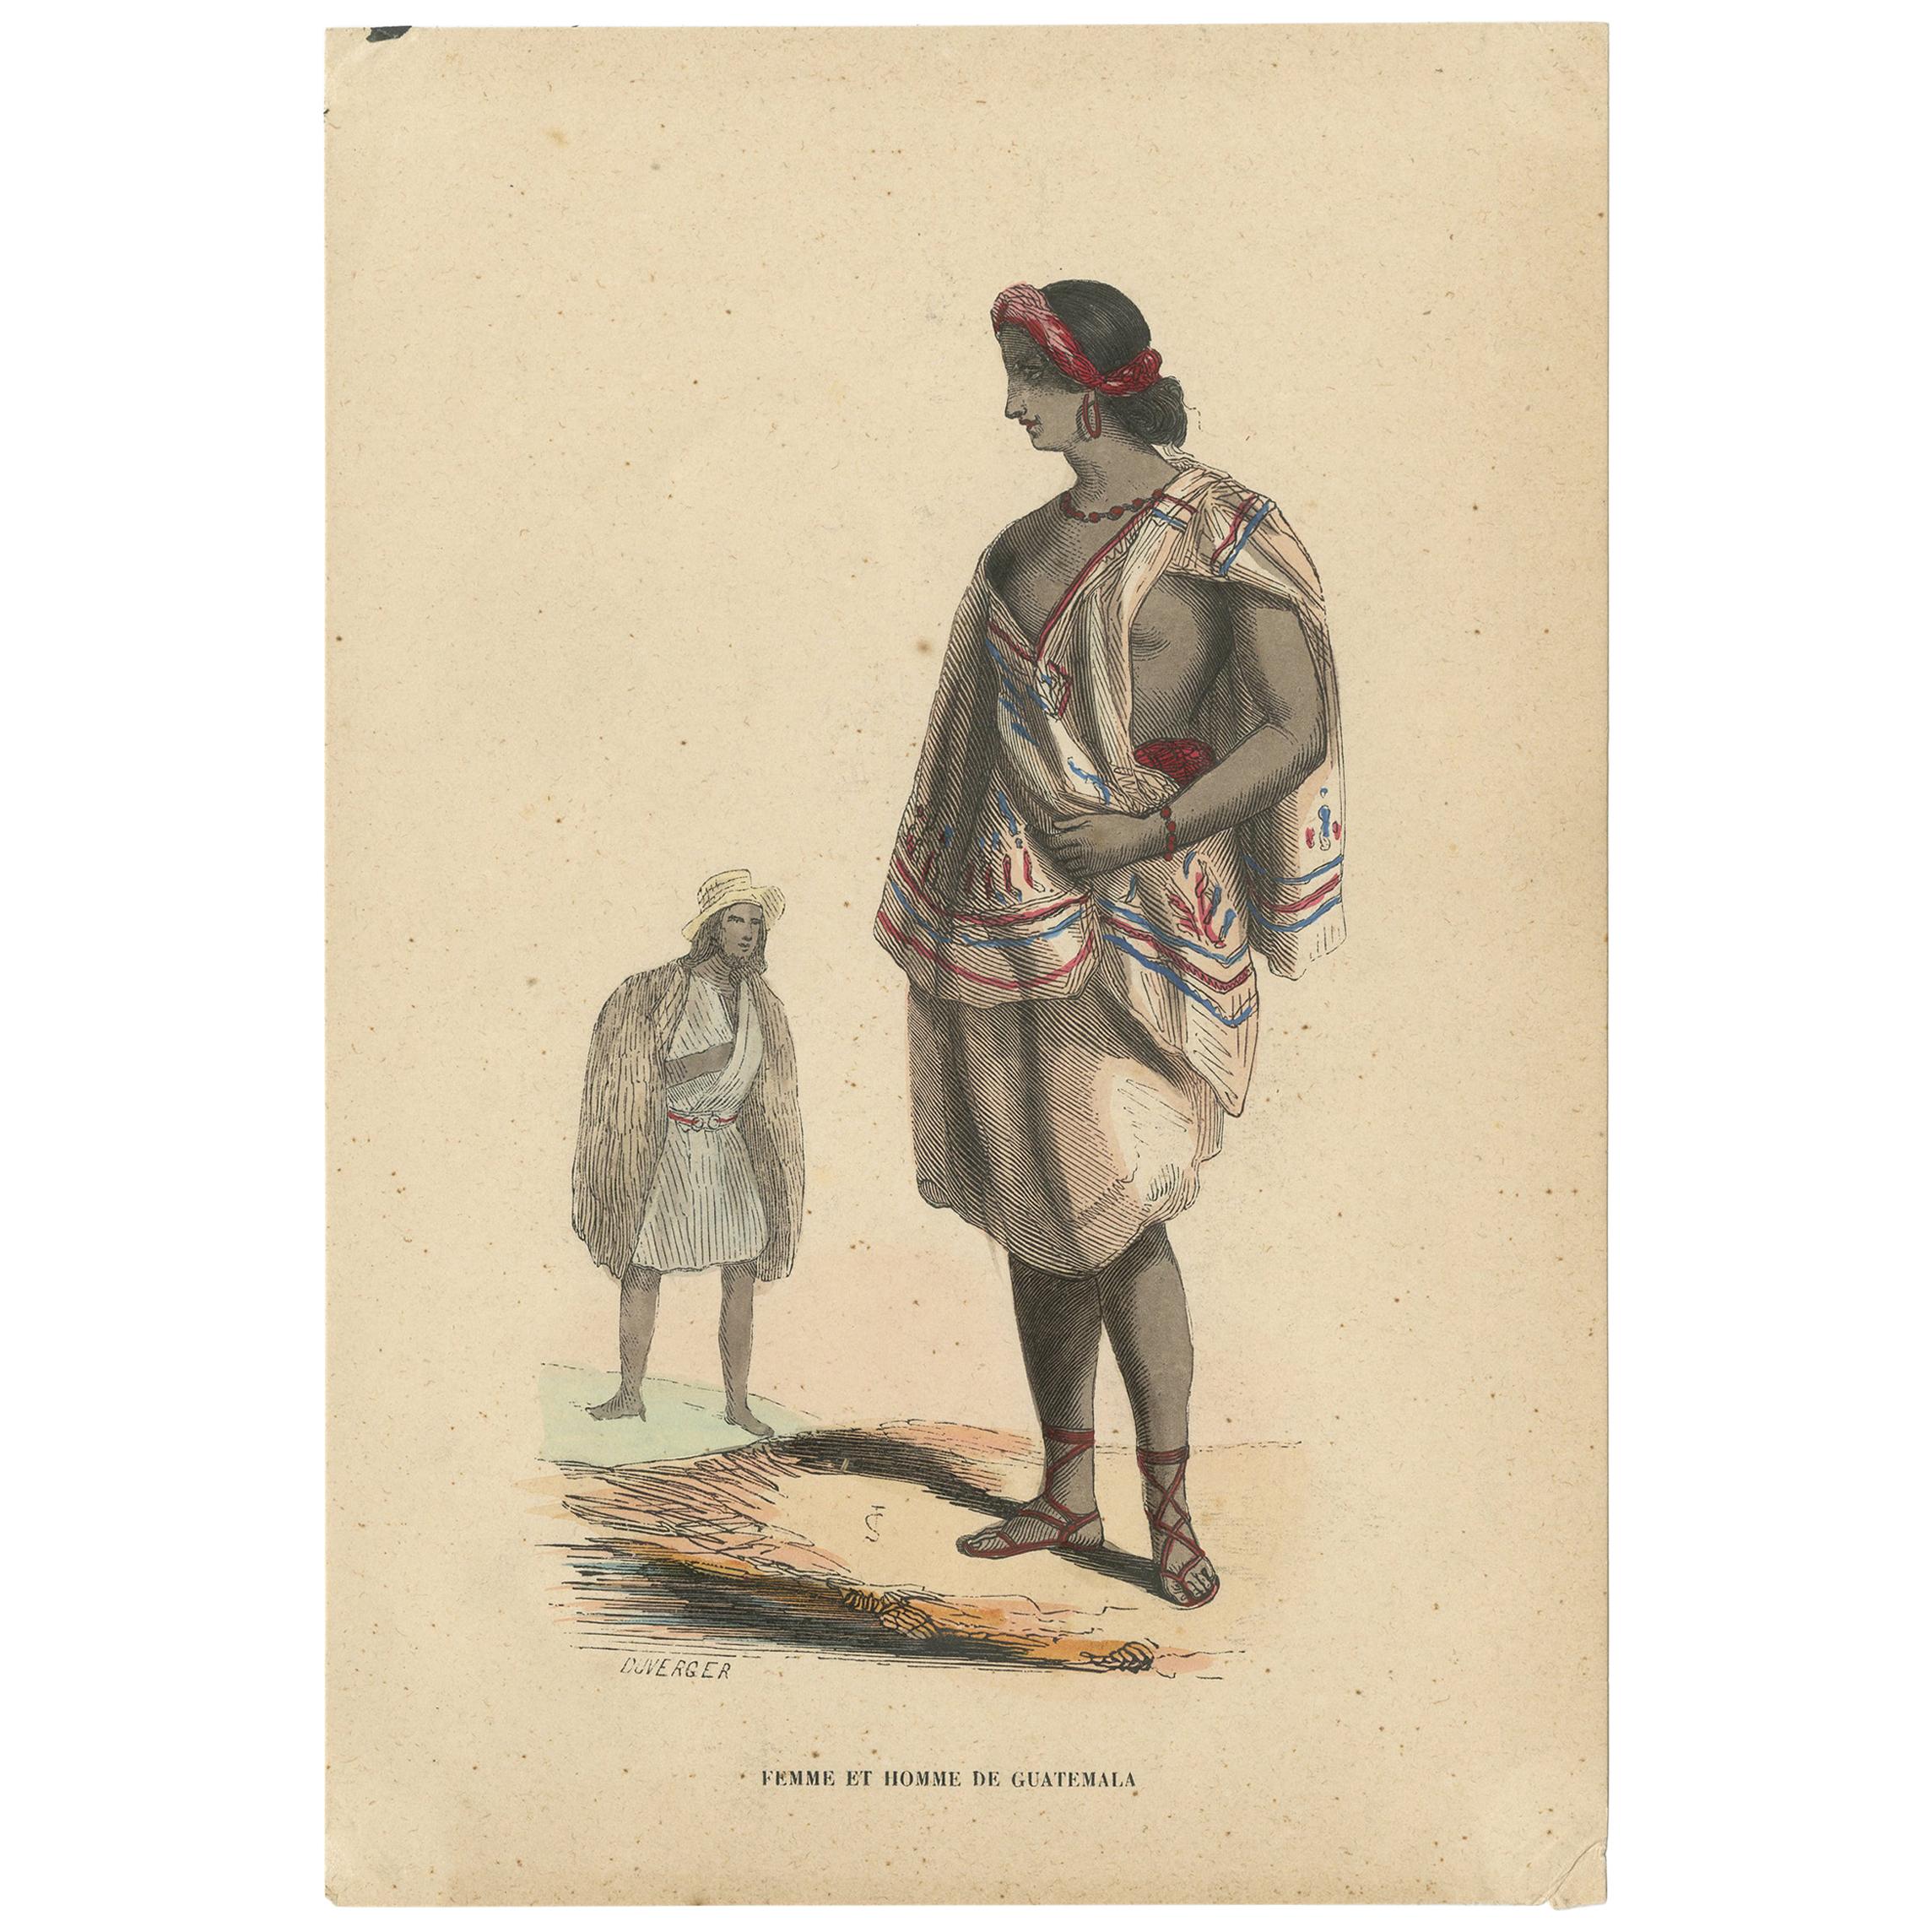 Antique Costume Print of Inhabitants of Guatemala by Wahlen, 1843